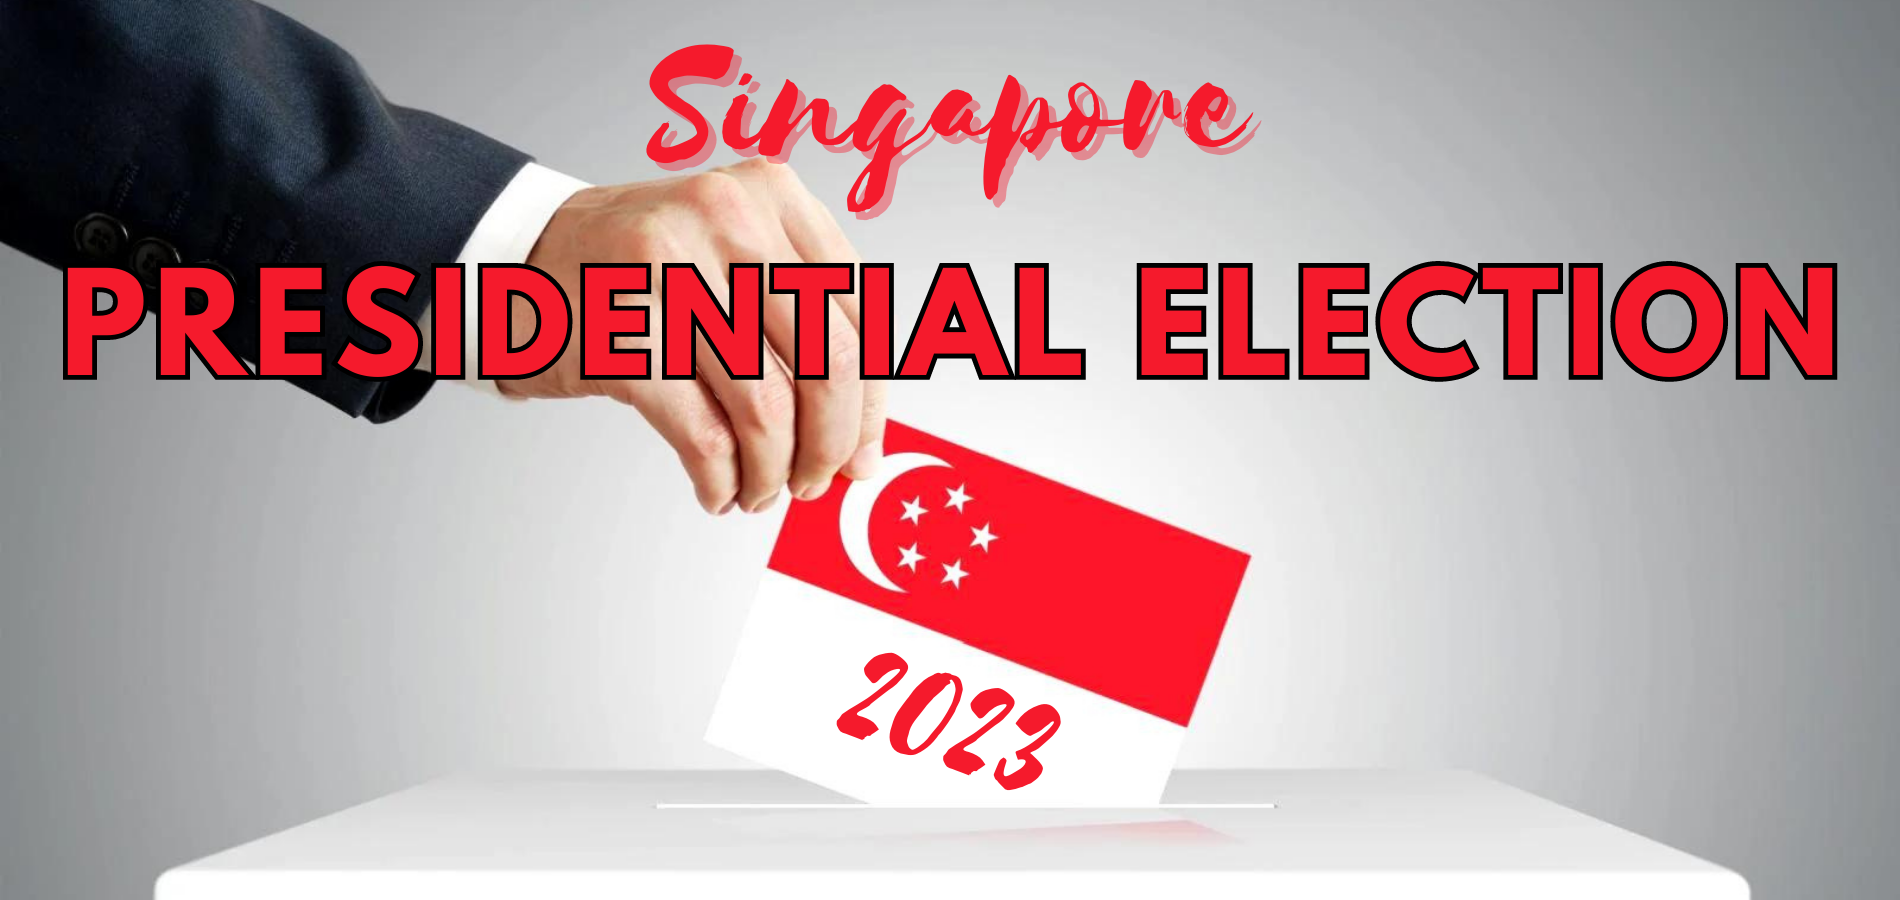 Singapore Presidential Election 2023 Election Day is September 1